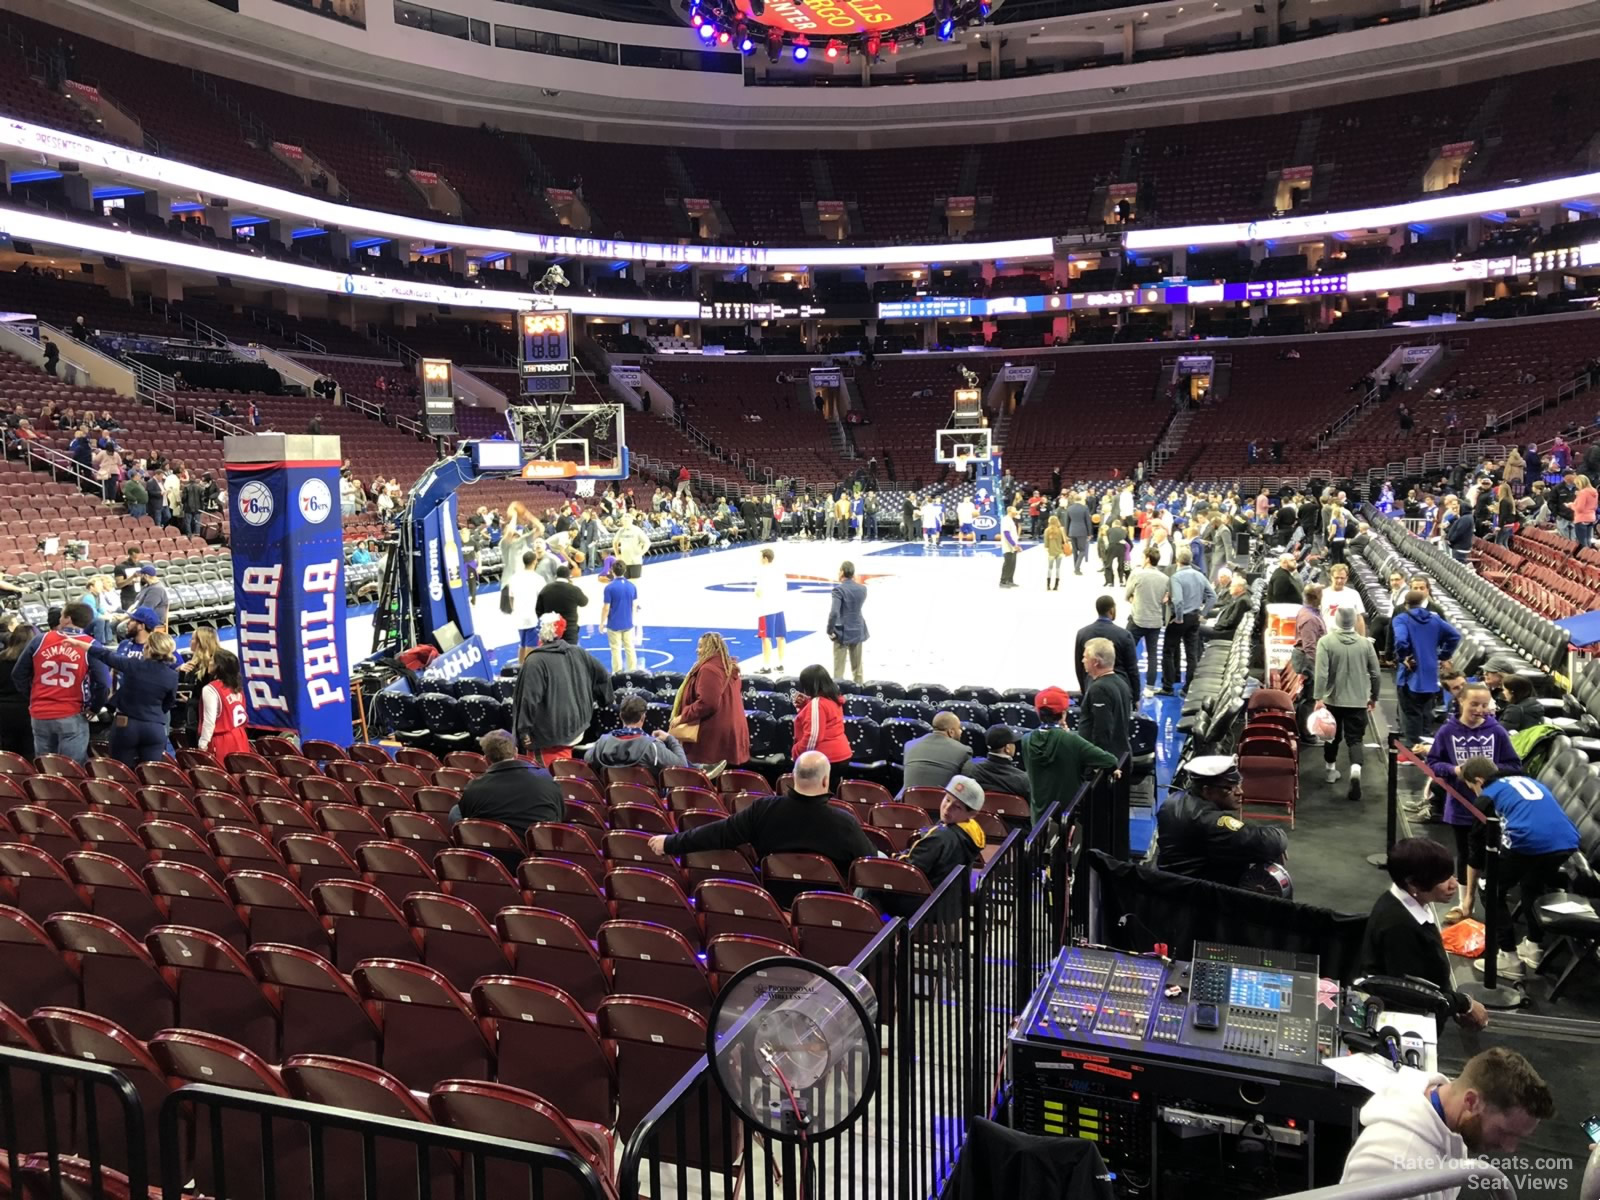 Sixers Seating Chart Virtual View